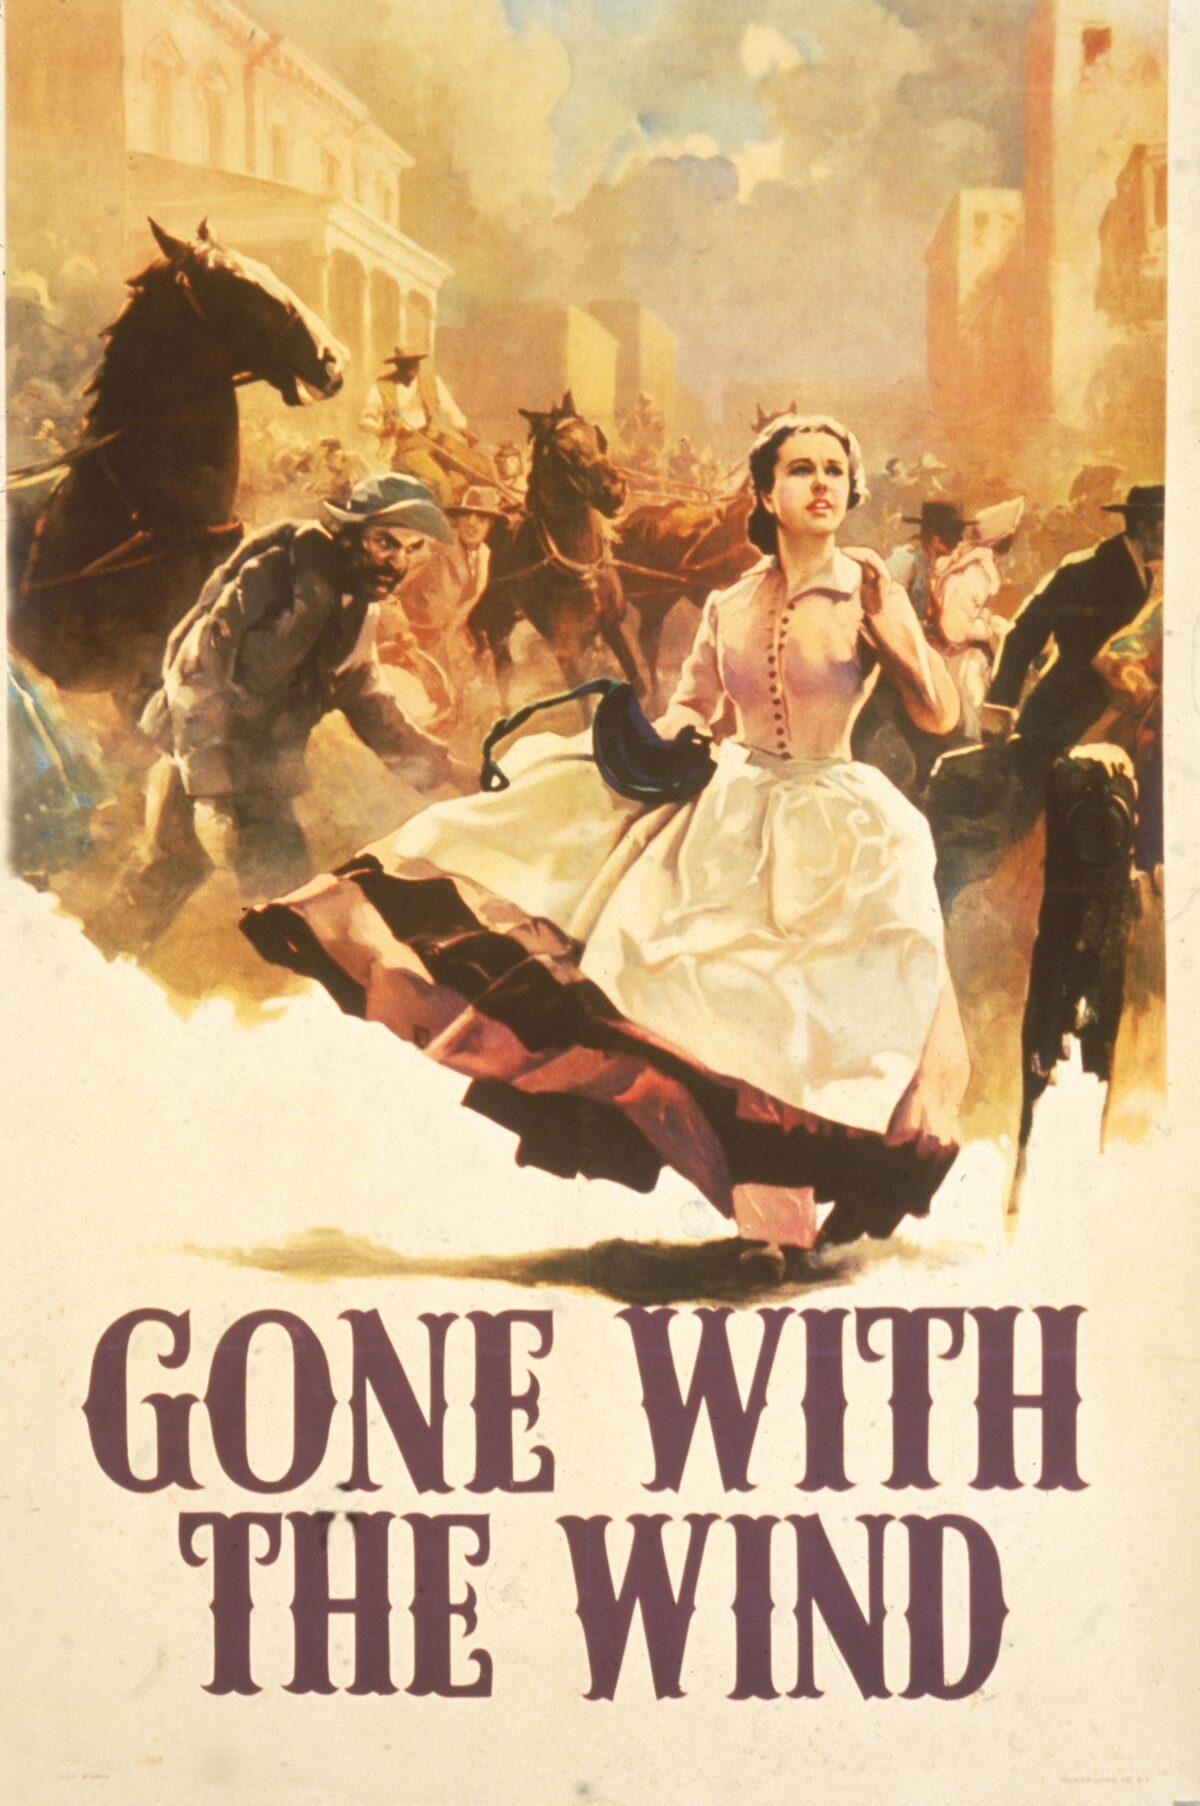 Scarlett O'Hara runs through the street, filled with horses and men, in this promotional poster for the book 'Gone With the Wind,' 1936. (Hulton Archive/Getty Images)